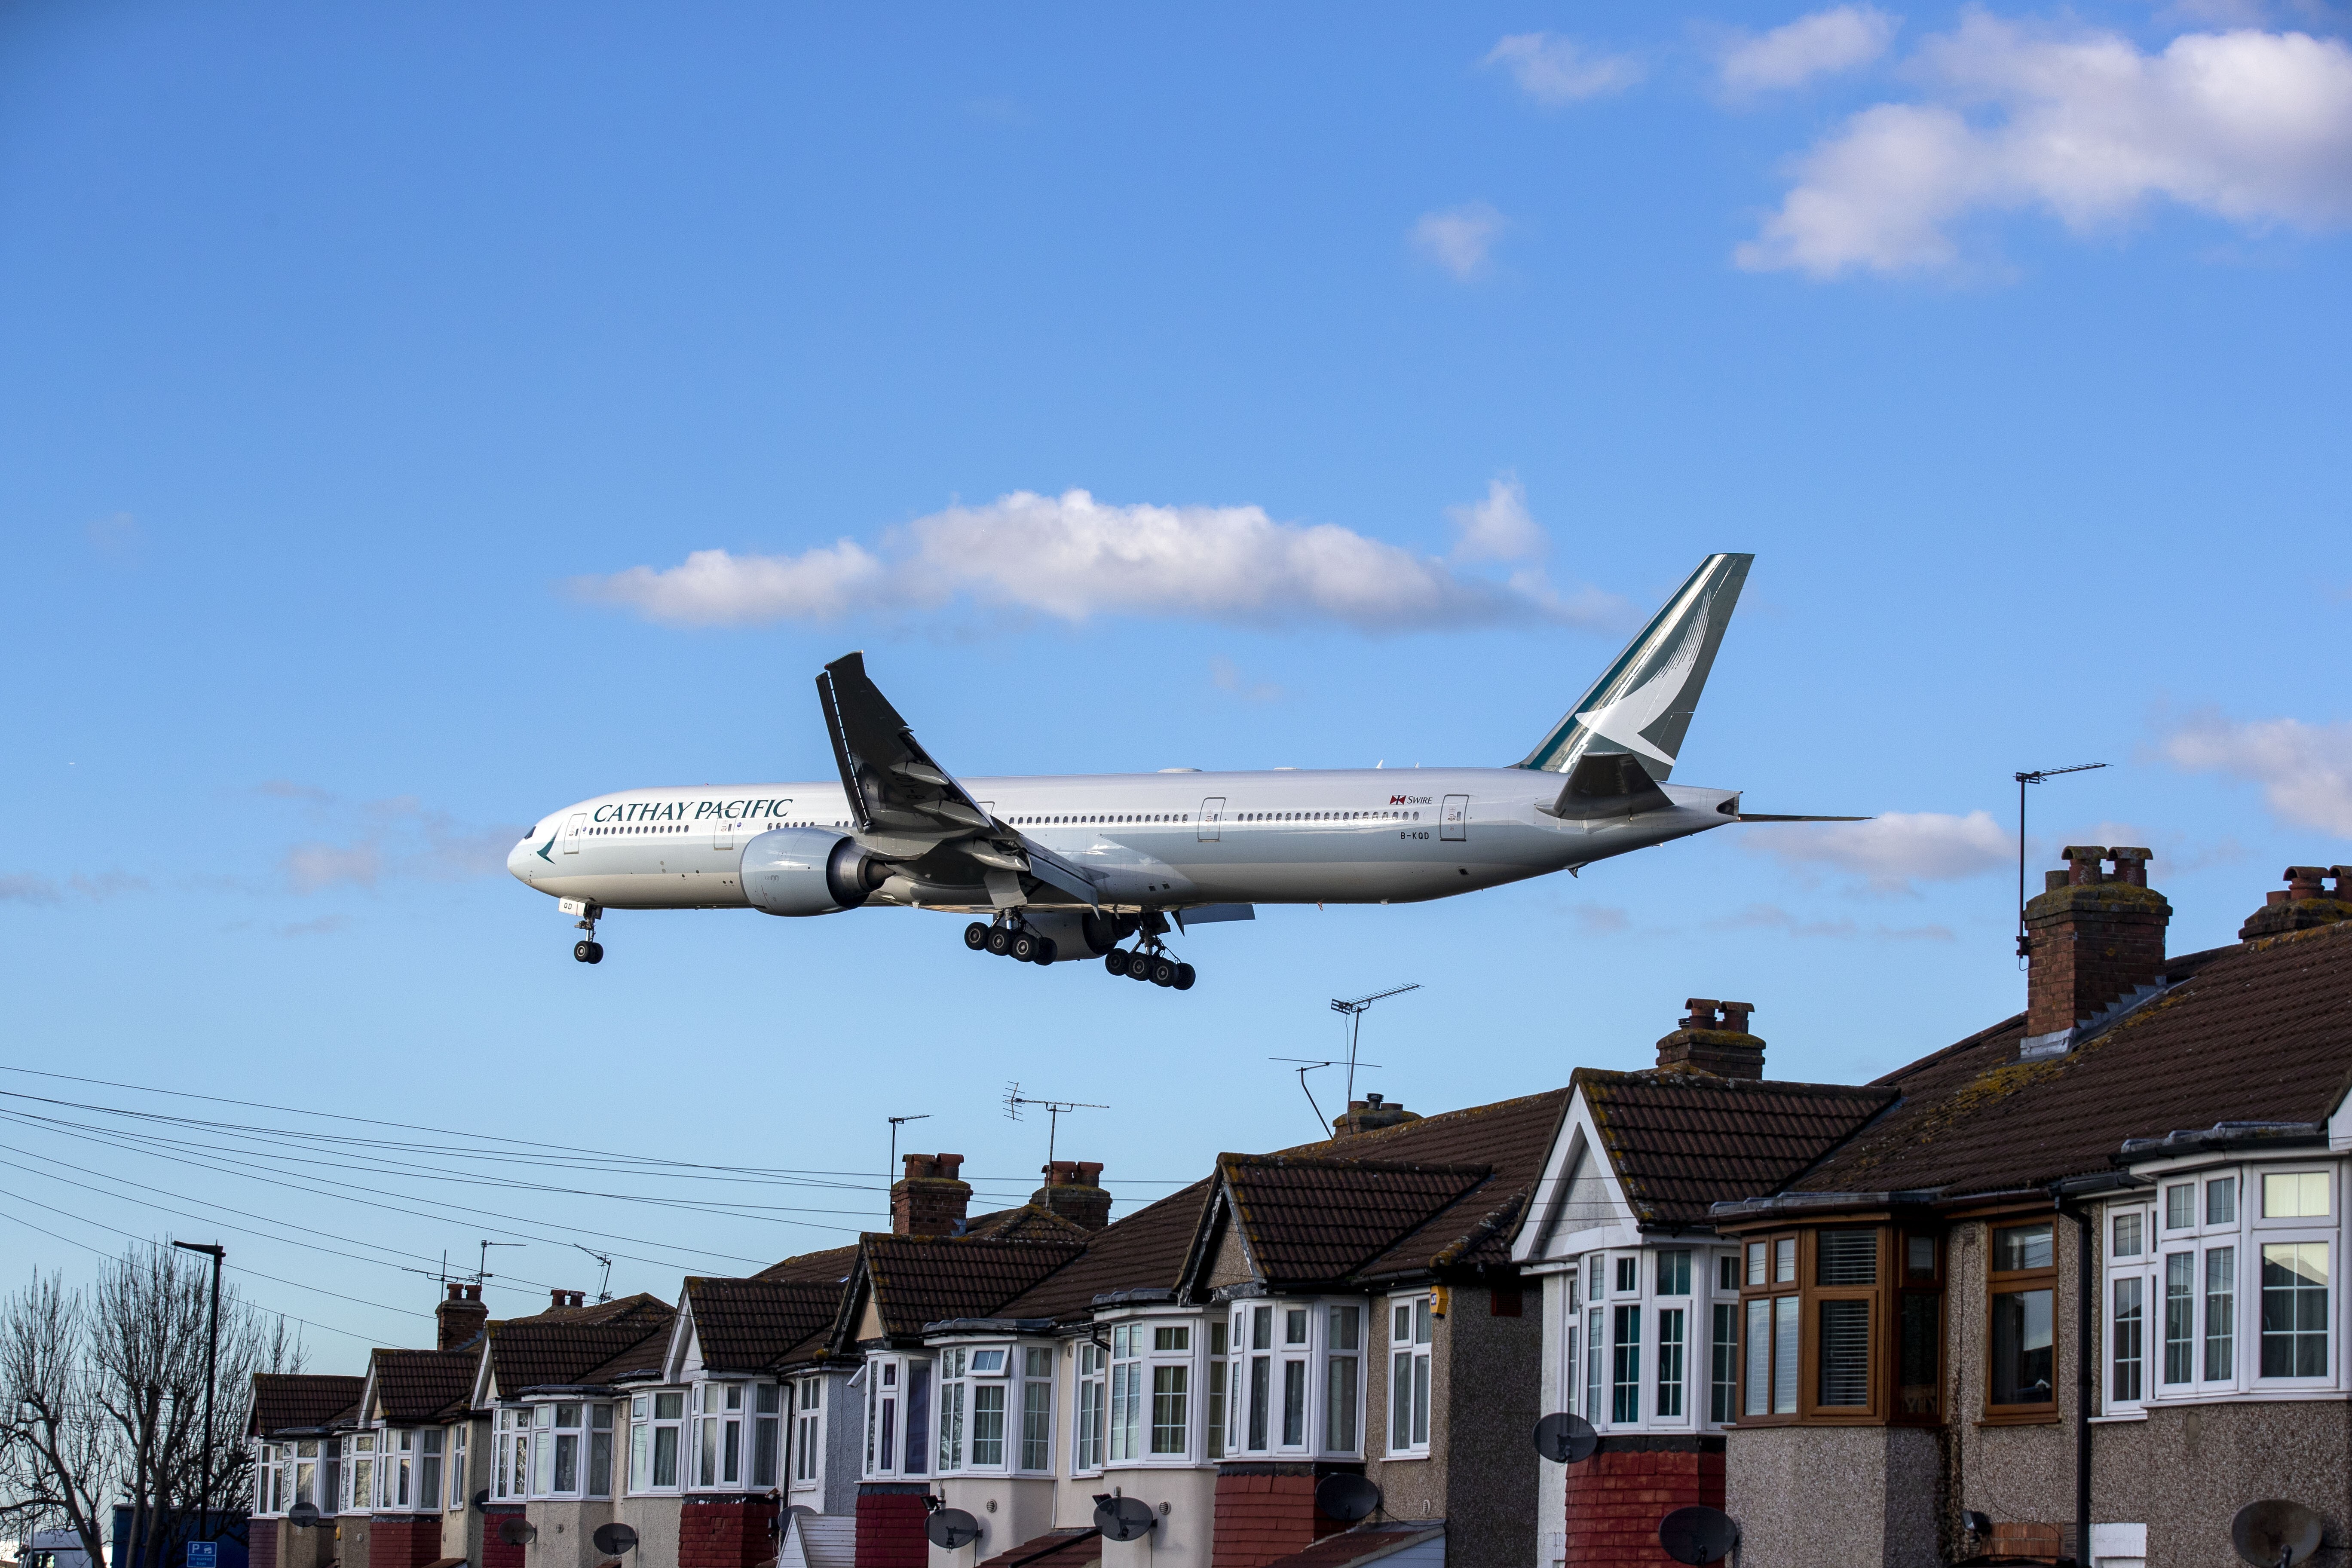 A Cathay Pacific Boeing 777 plane making its landing approach at Heathrow Airport in West London. Photo: Getty Images